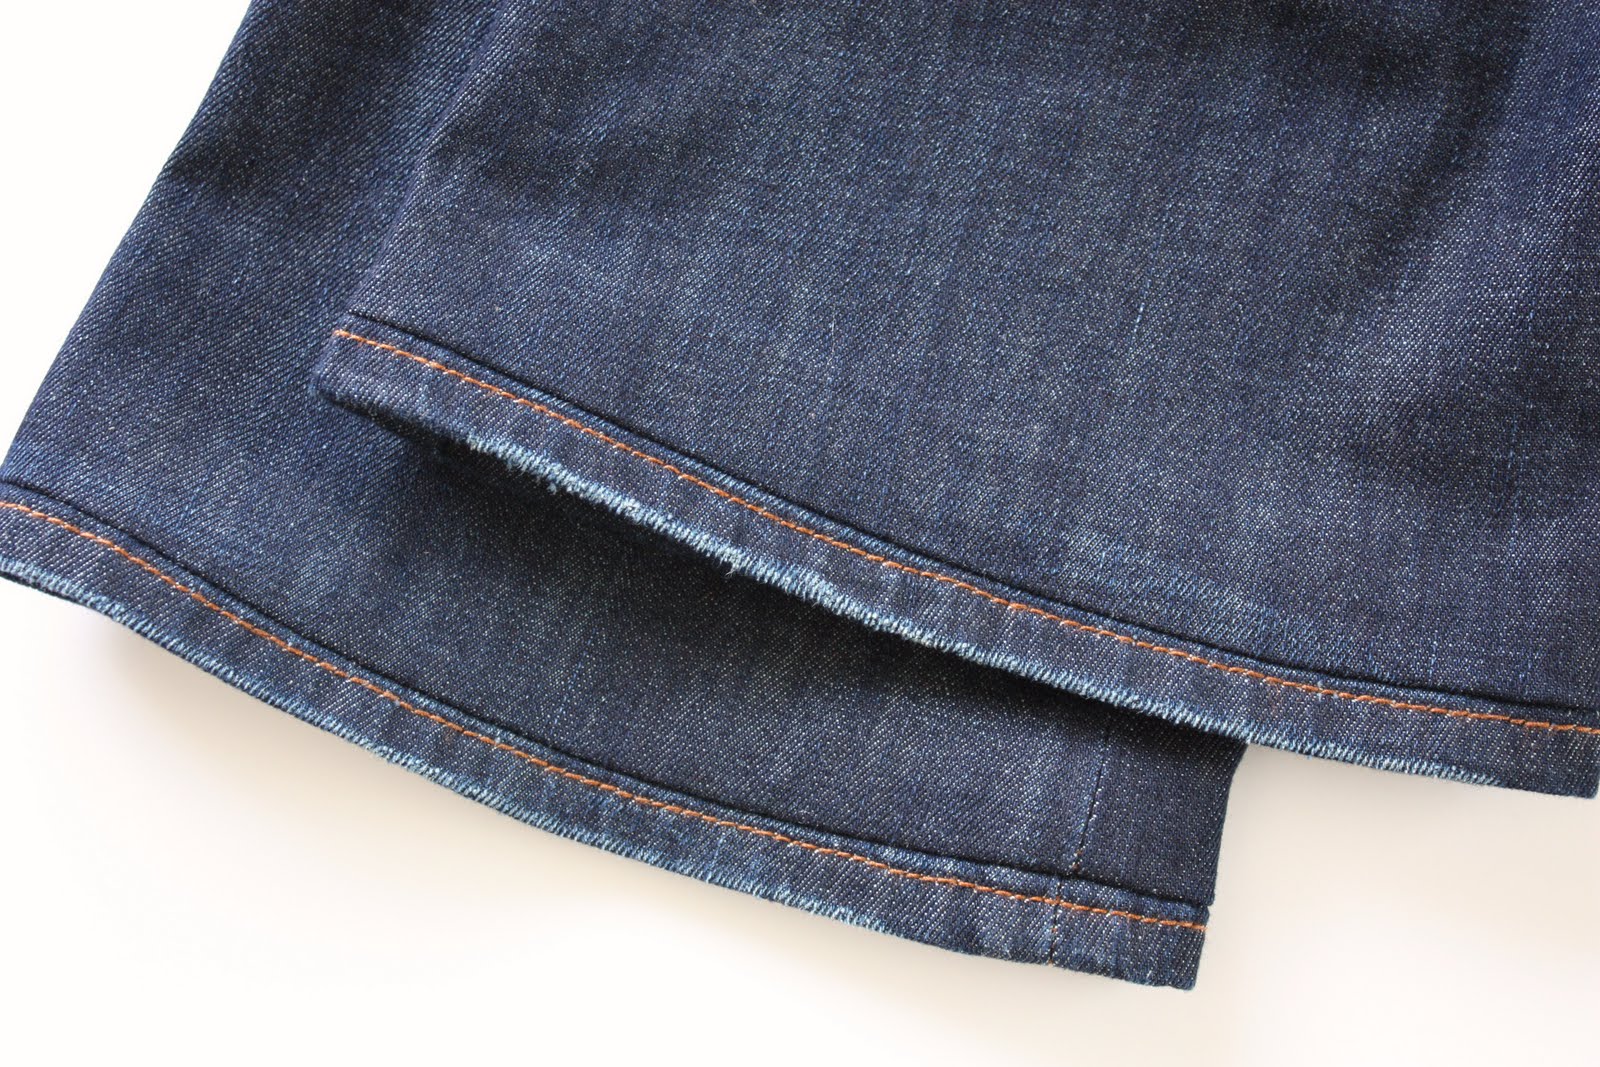 How To Hem Jeans